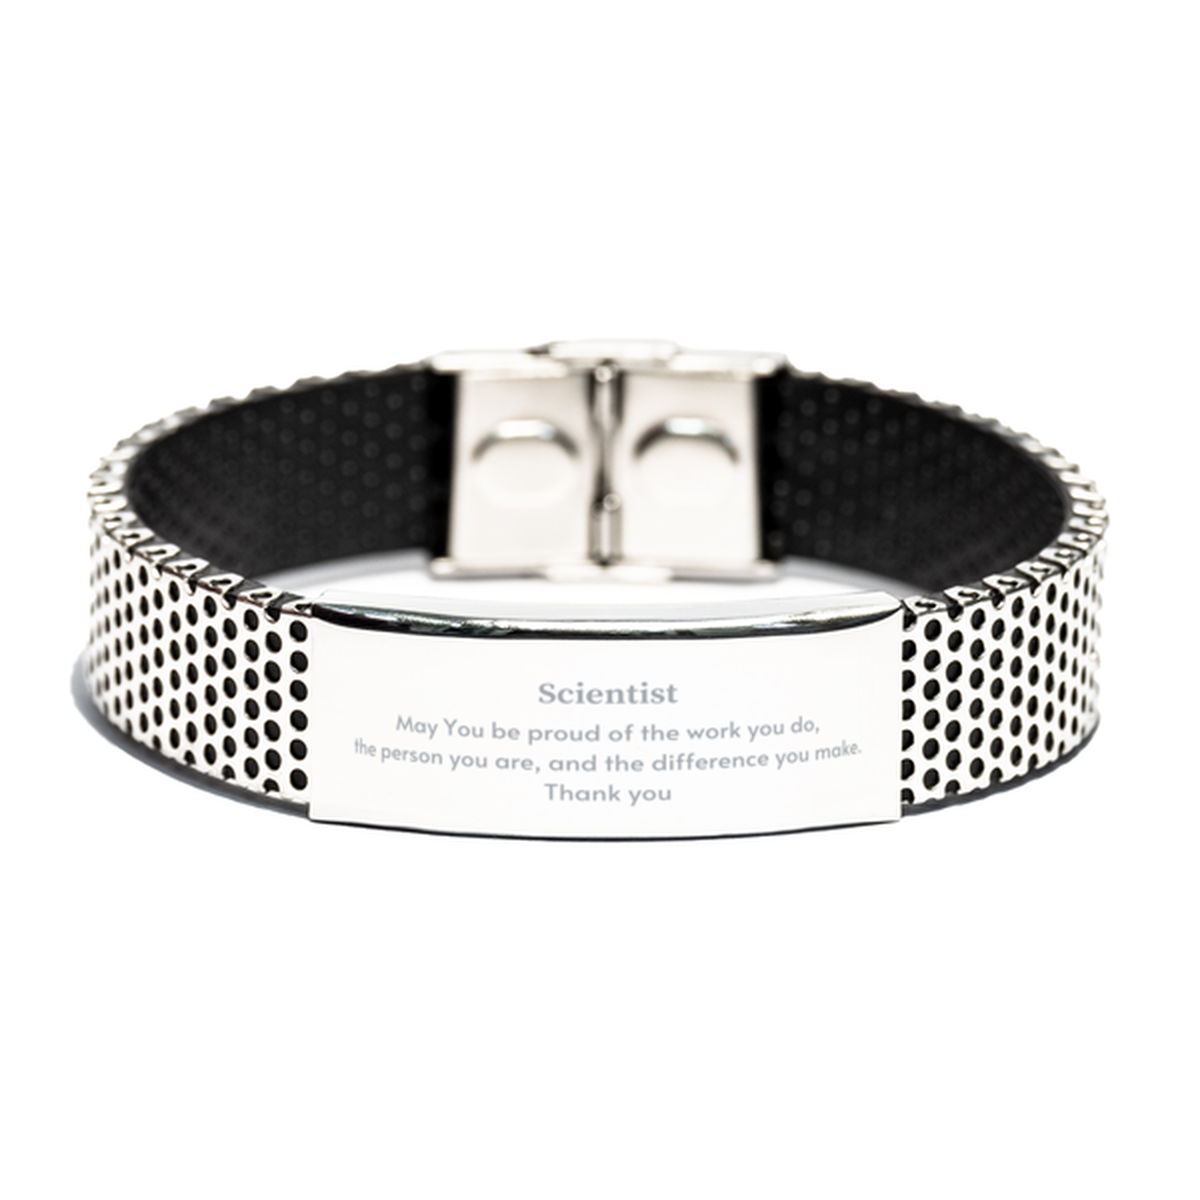 Heartwarming Stainless Steel Bracelet Retirement Coworkers Gifts for Scientist, Scientist May You be proud of the work you do, the person you are Gifts for Boss Men Women Friends